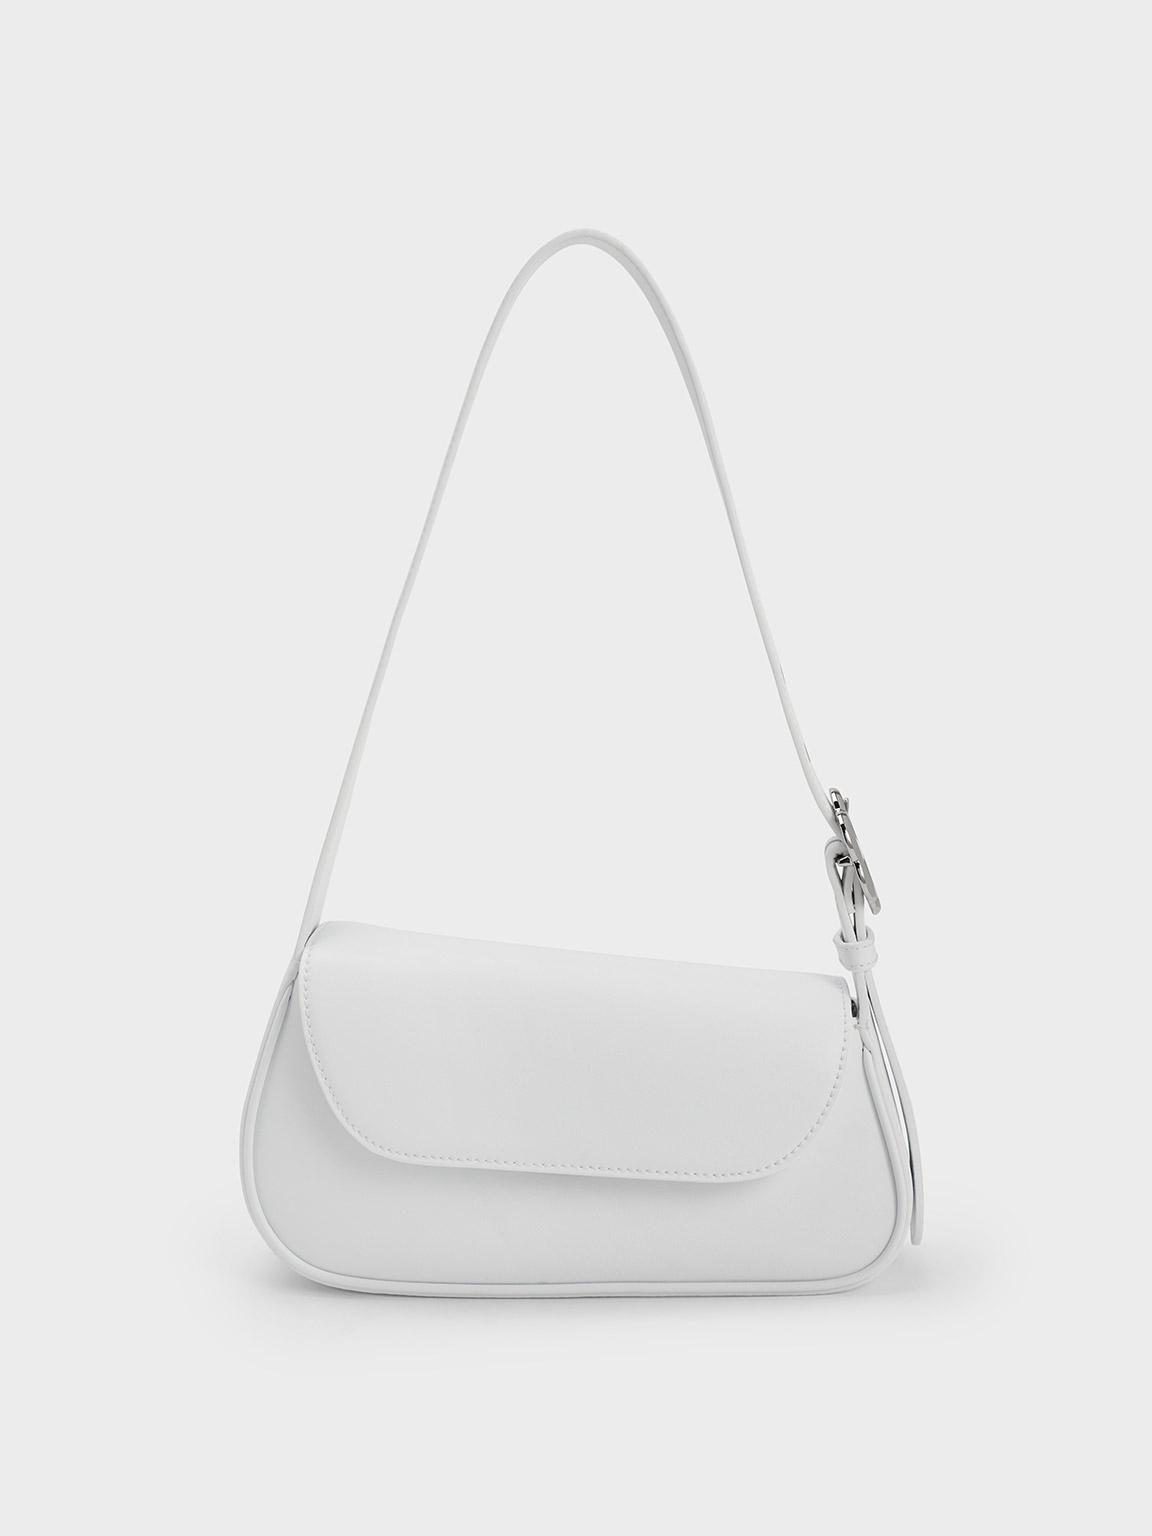 Charles & Keith Petra Asymmetrical Front Flap Bag in White | Lyst